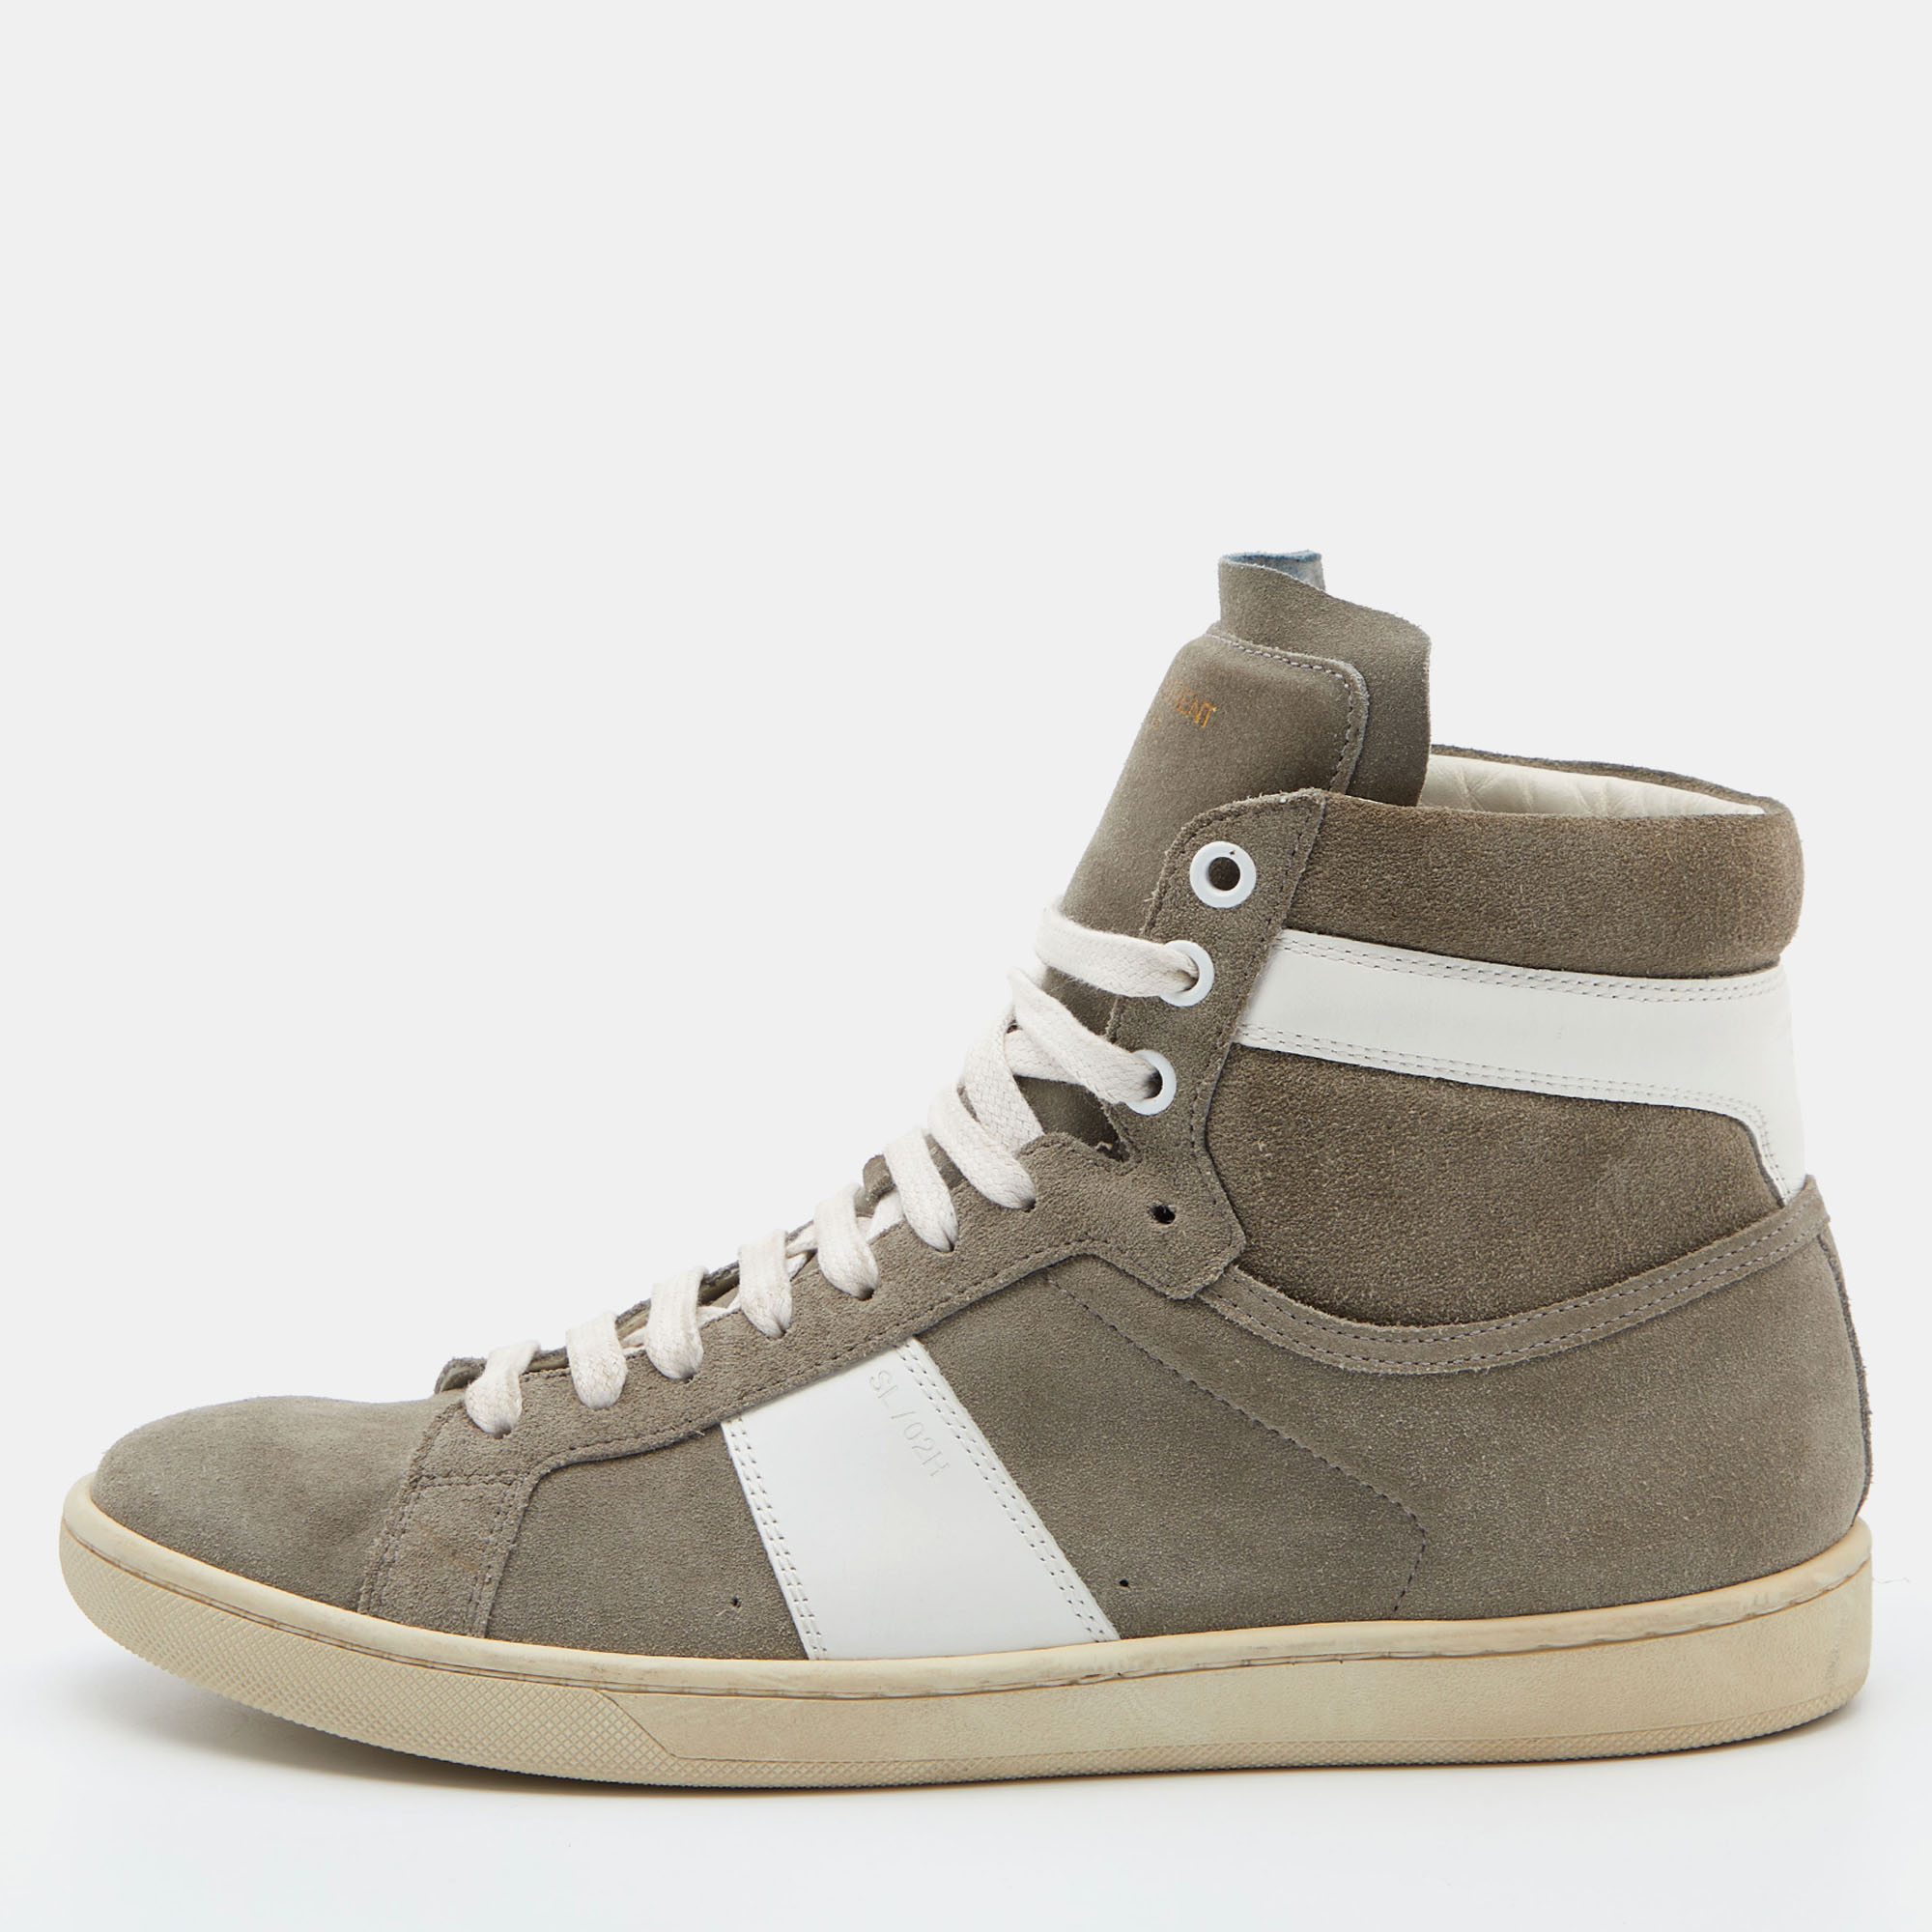 Saint Laurent Grey/White Suede And Leather High Top Sneakers Size 39